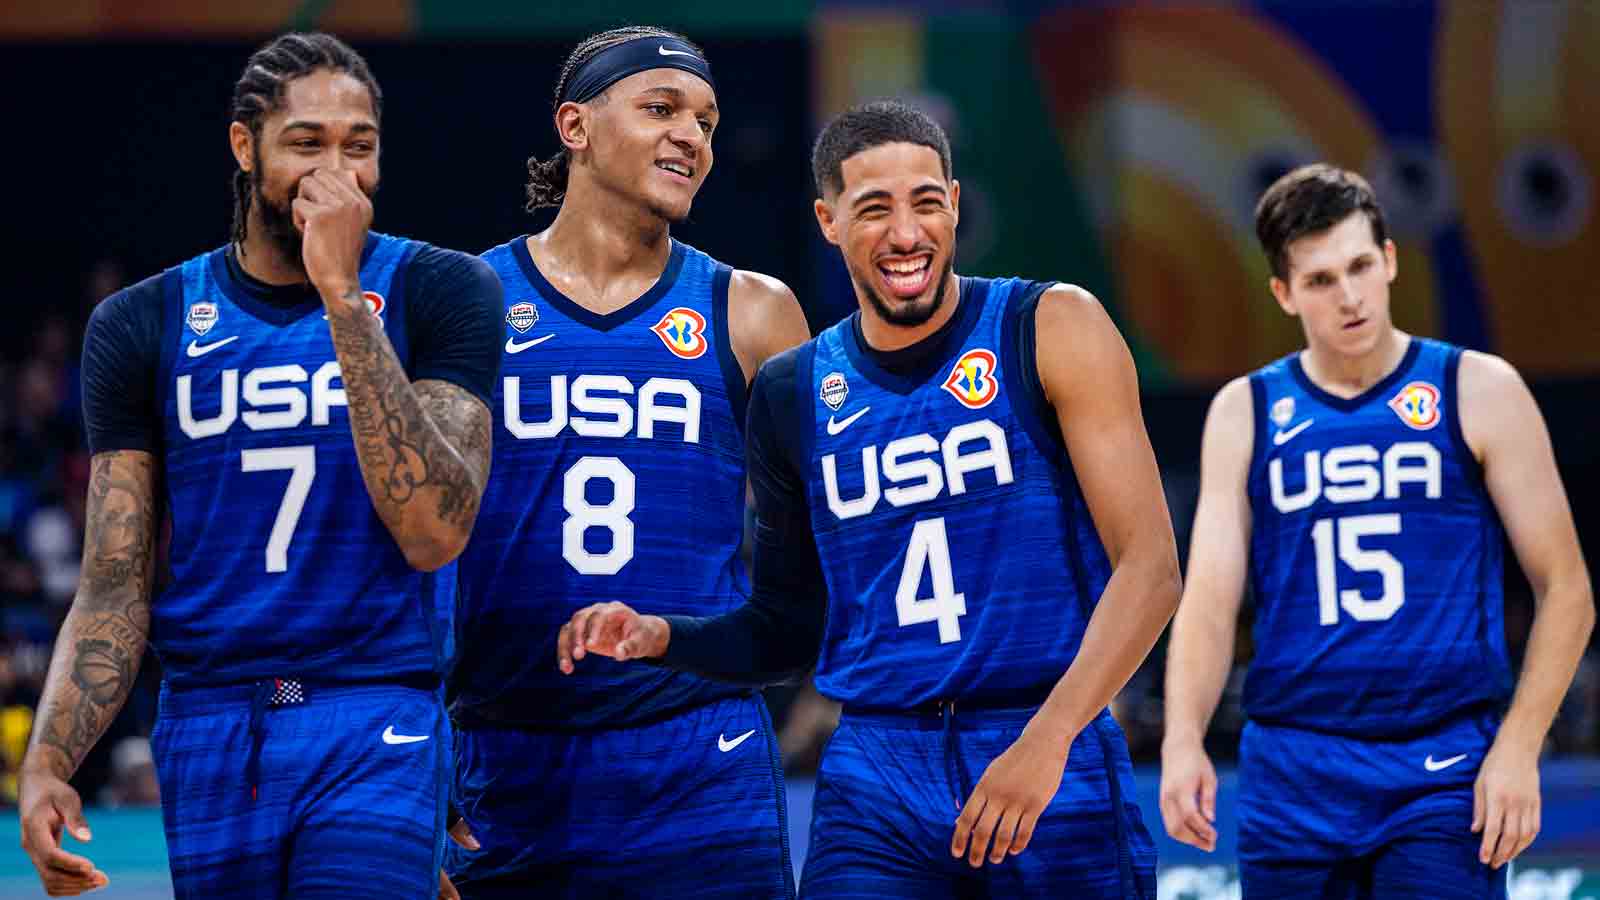 Tyrese Haliburton with Team USA, Daniel Theis with Germany, and